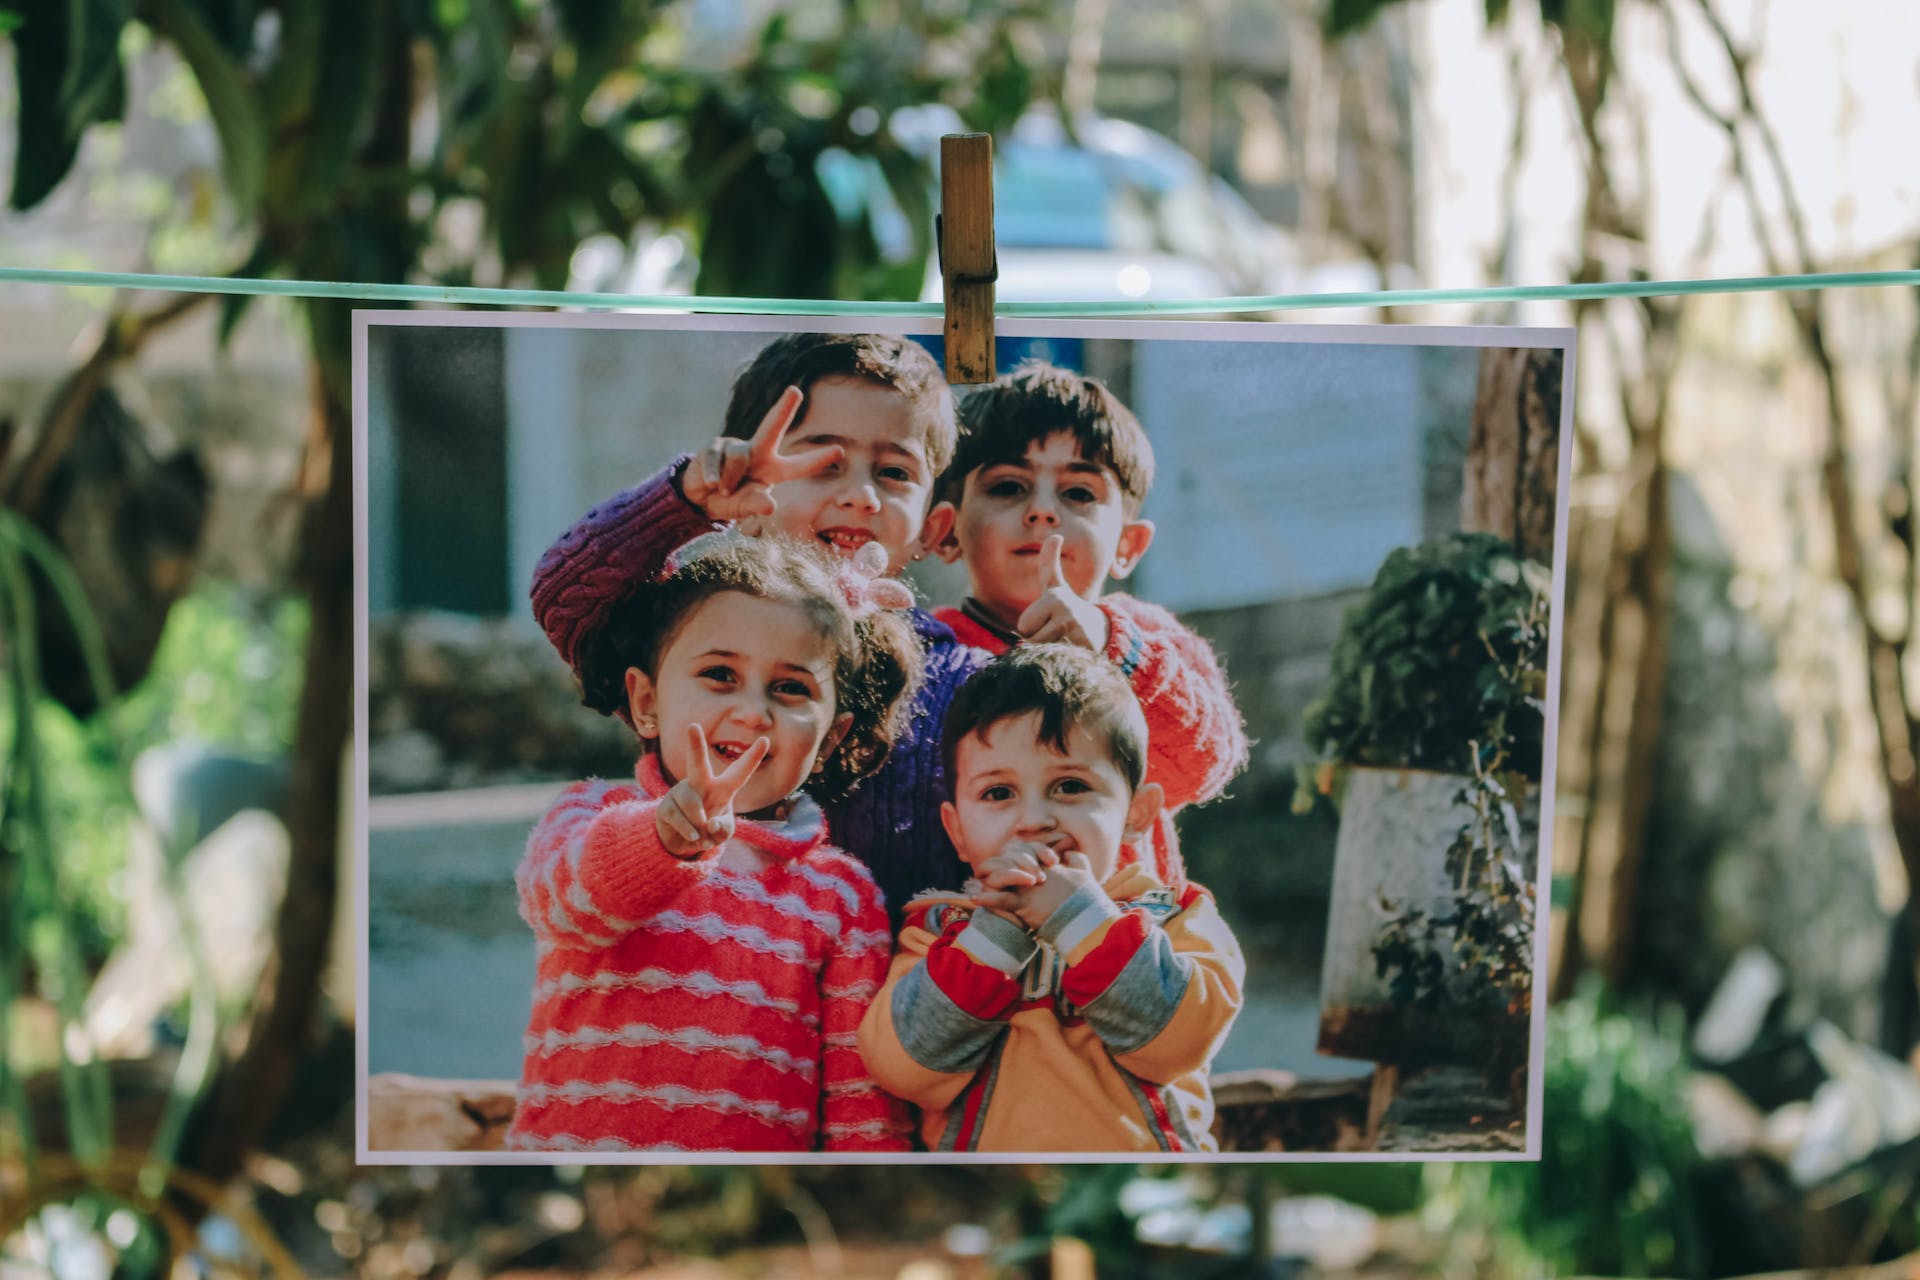 A photo of four children | Source: Pexels